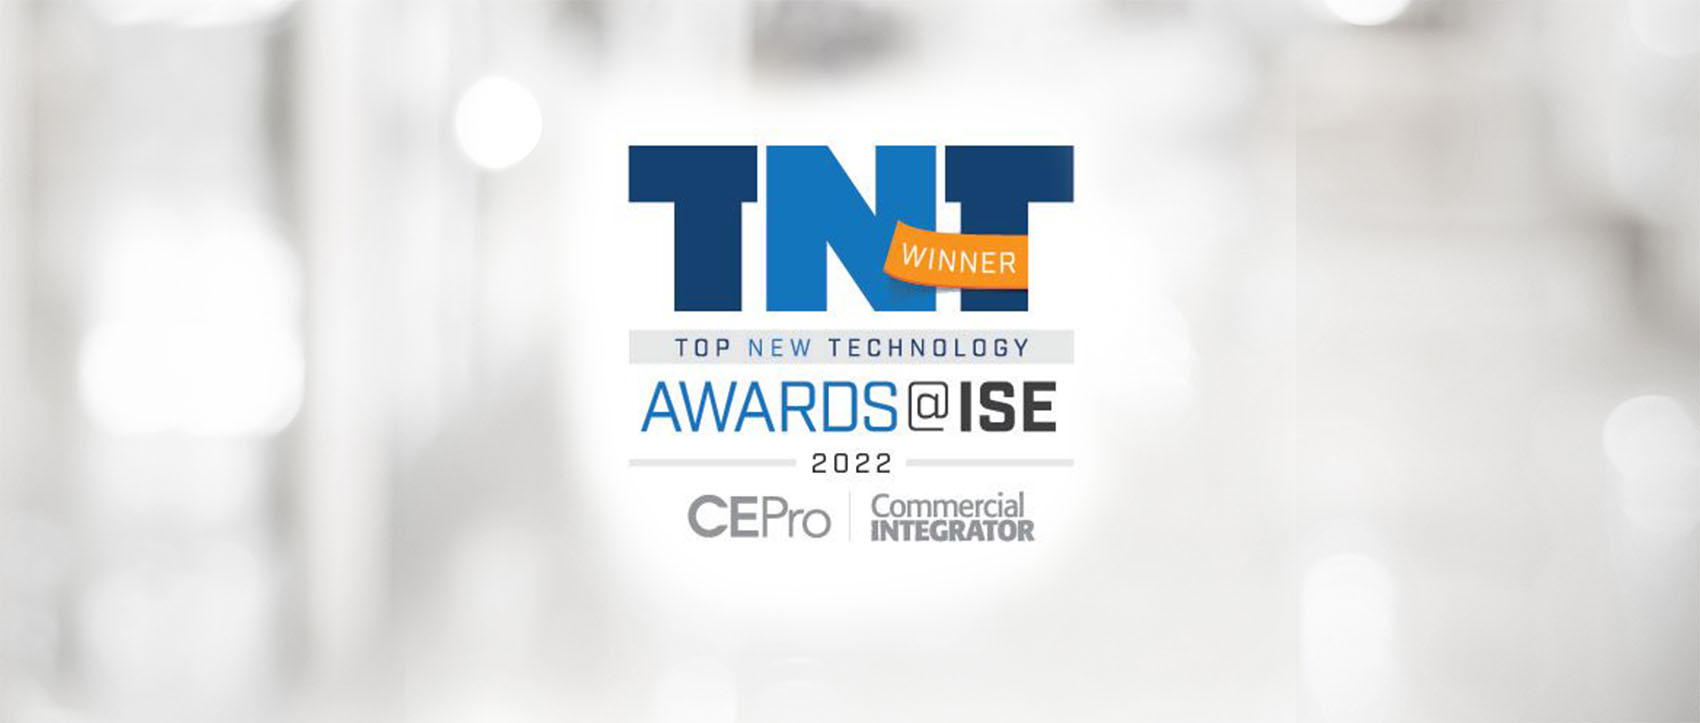 CyberSecurity Leader guardDog.ai Wins CE Pro-Commercial Integrator 2022 Top New Technology (TNT) Award